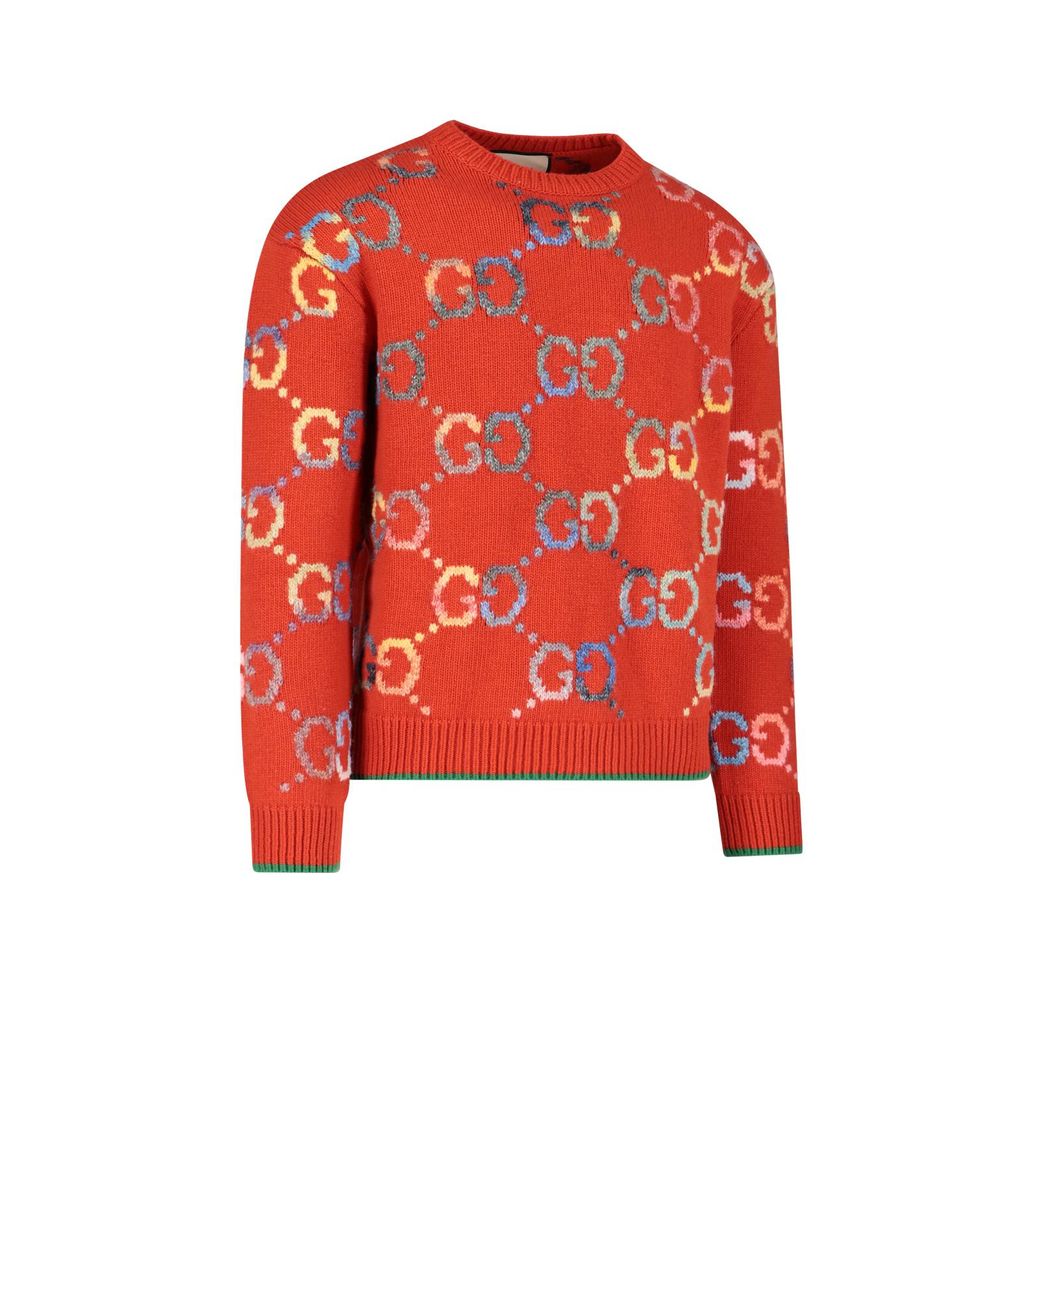 Gucci 'GG' Jacquard Sweater in Red for Men | Lyst